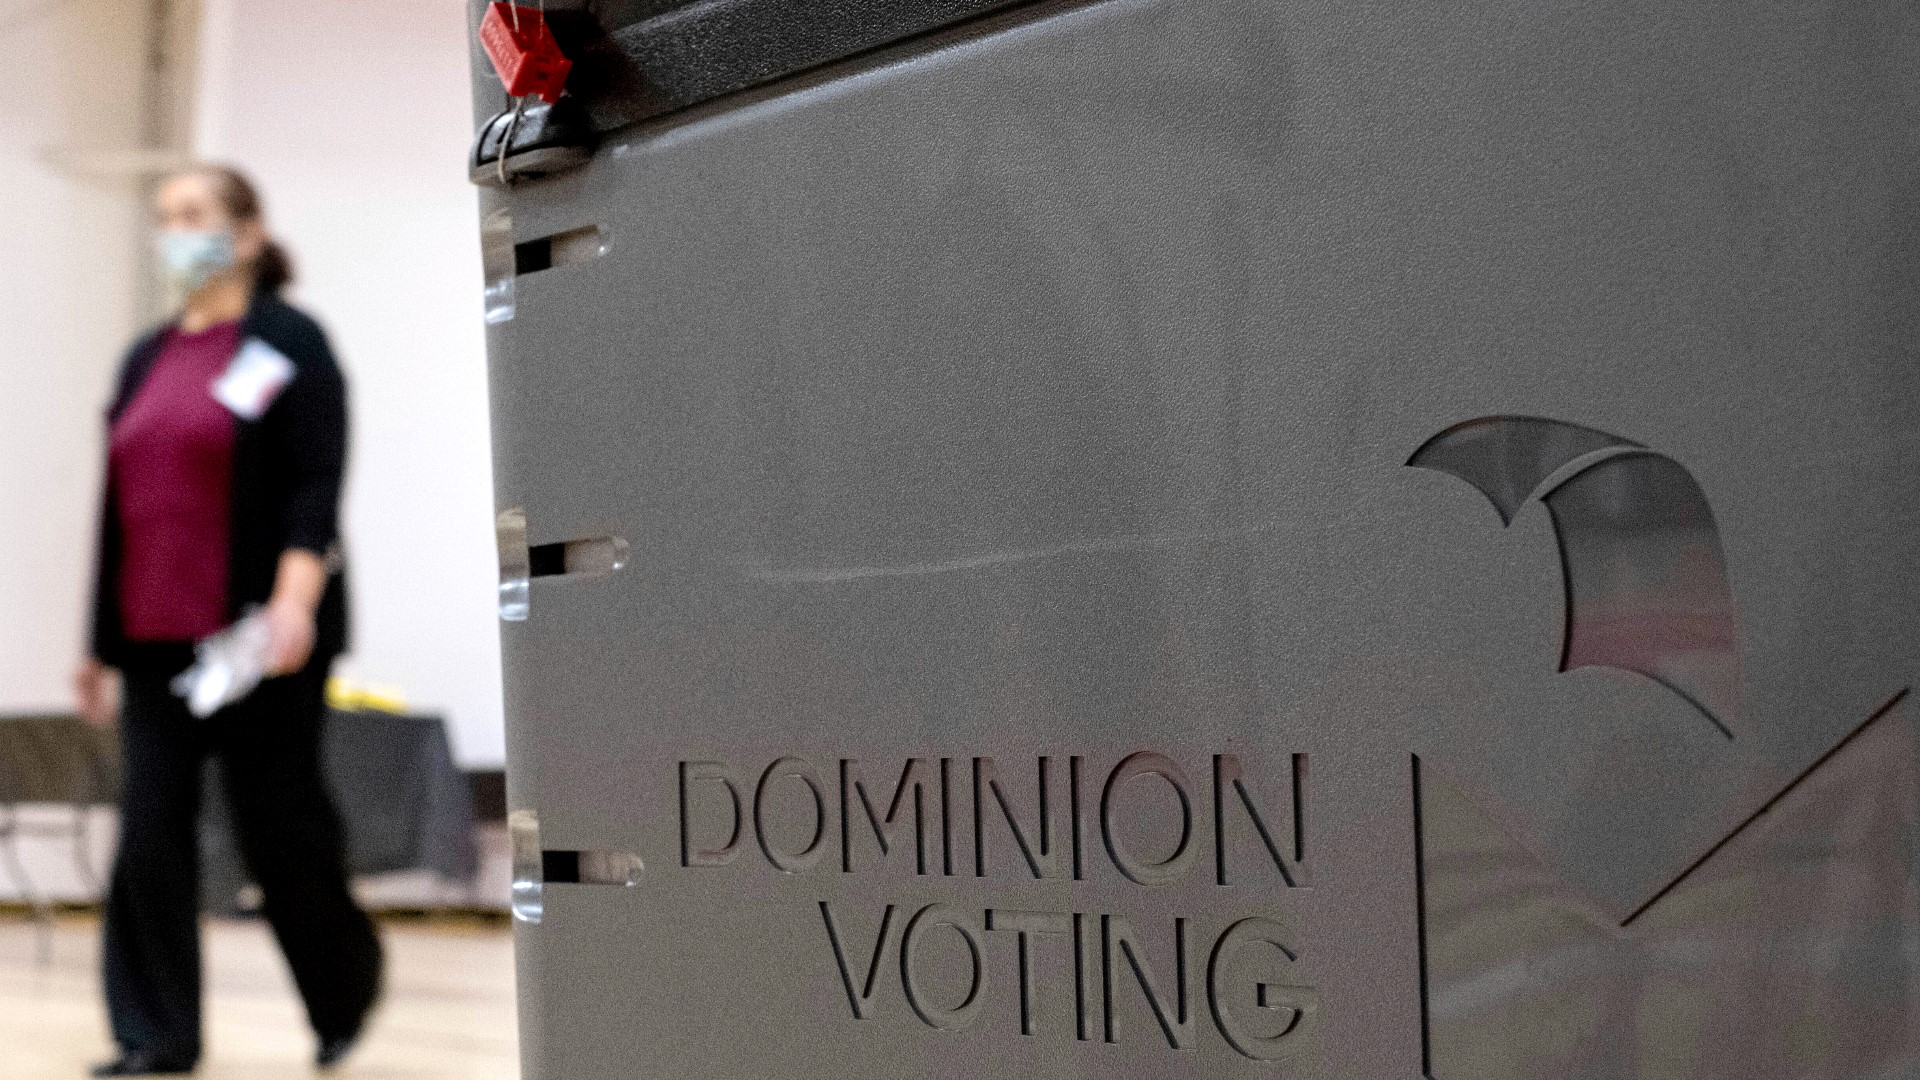 The defamation case between Dominion Voting Systems and Fox News has been "resolved."